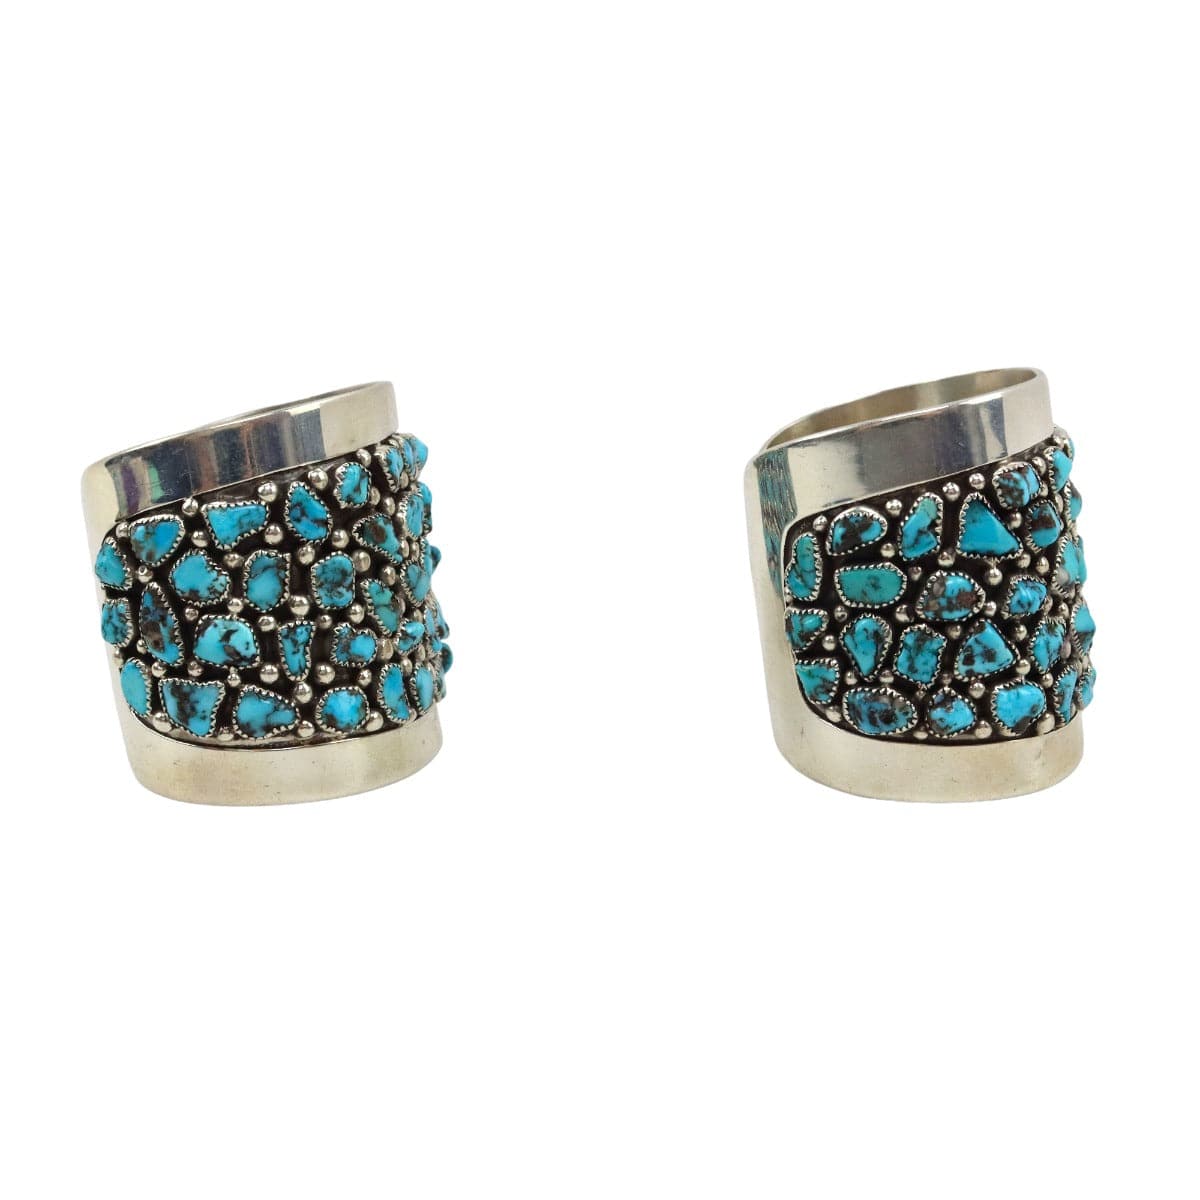 Frank Patania Sr. (1898-1964) - Pair of Burnham Turquoise Nugget and Silver Cuffs c. 1950, size 6.5 each (J91699-1022-004) 1